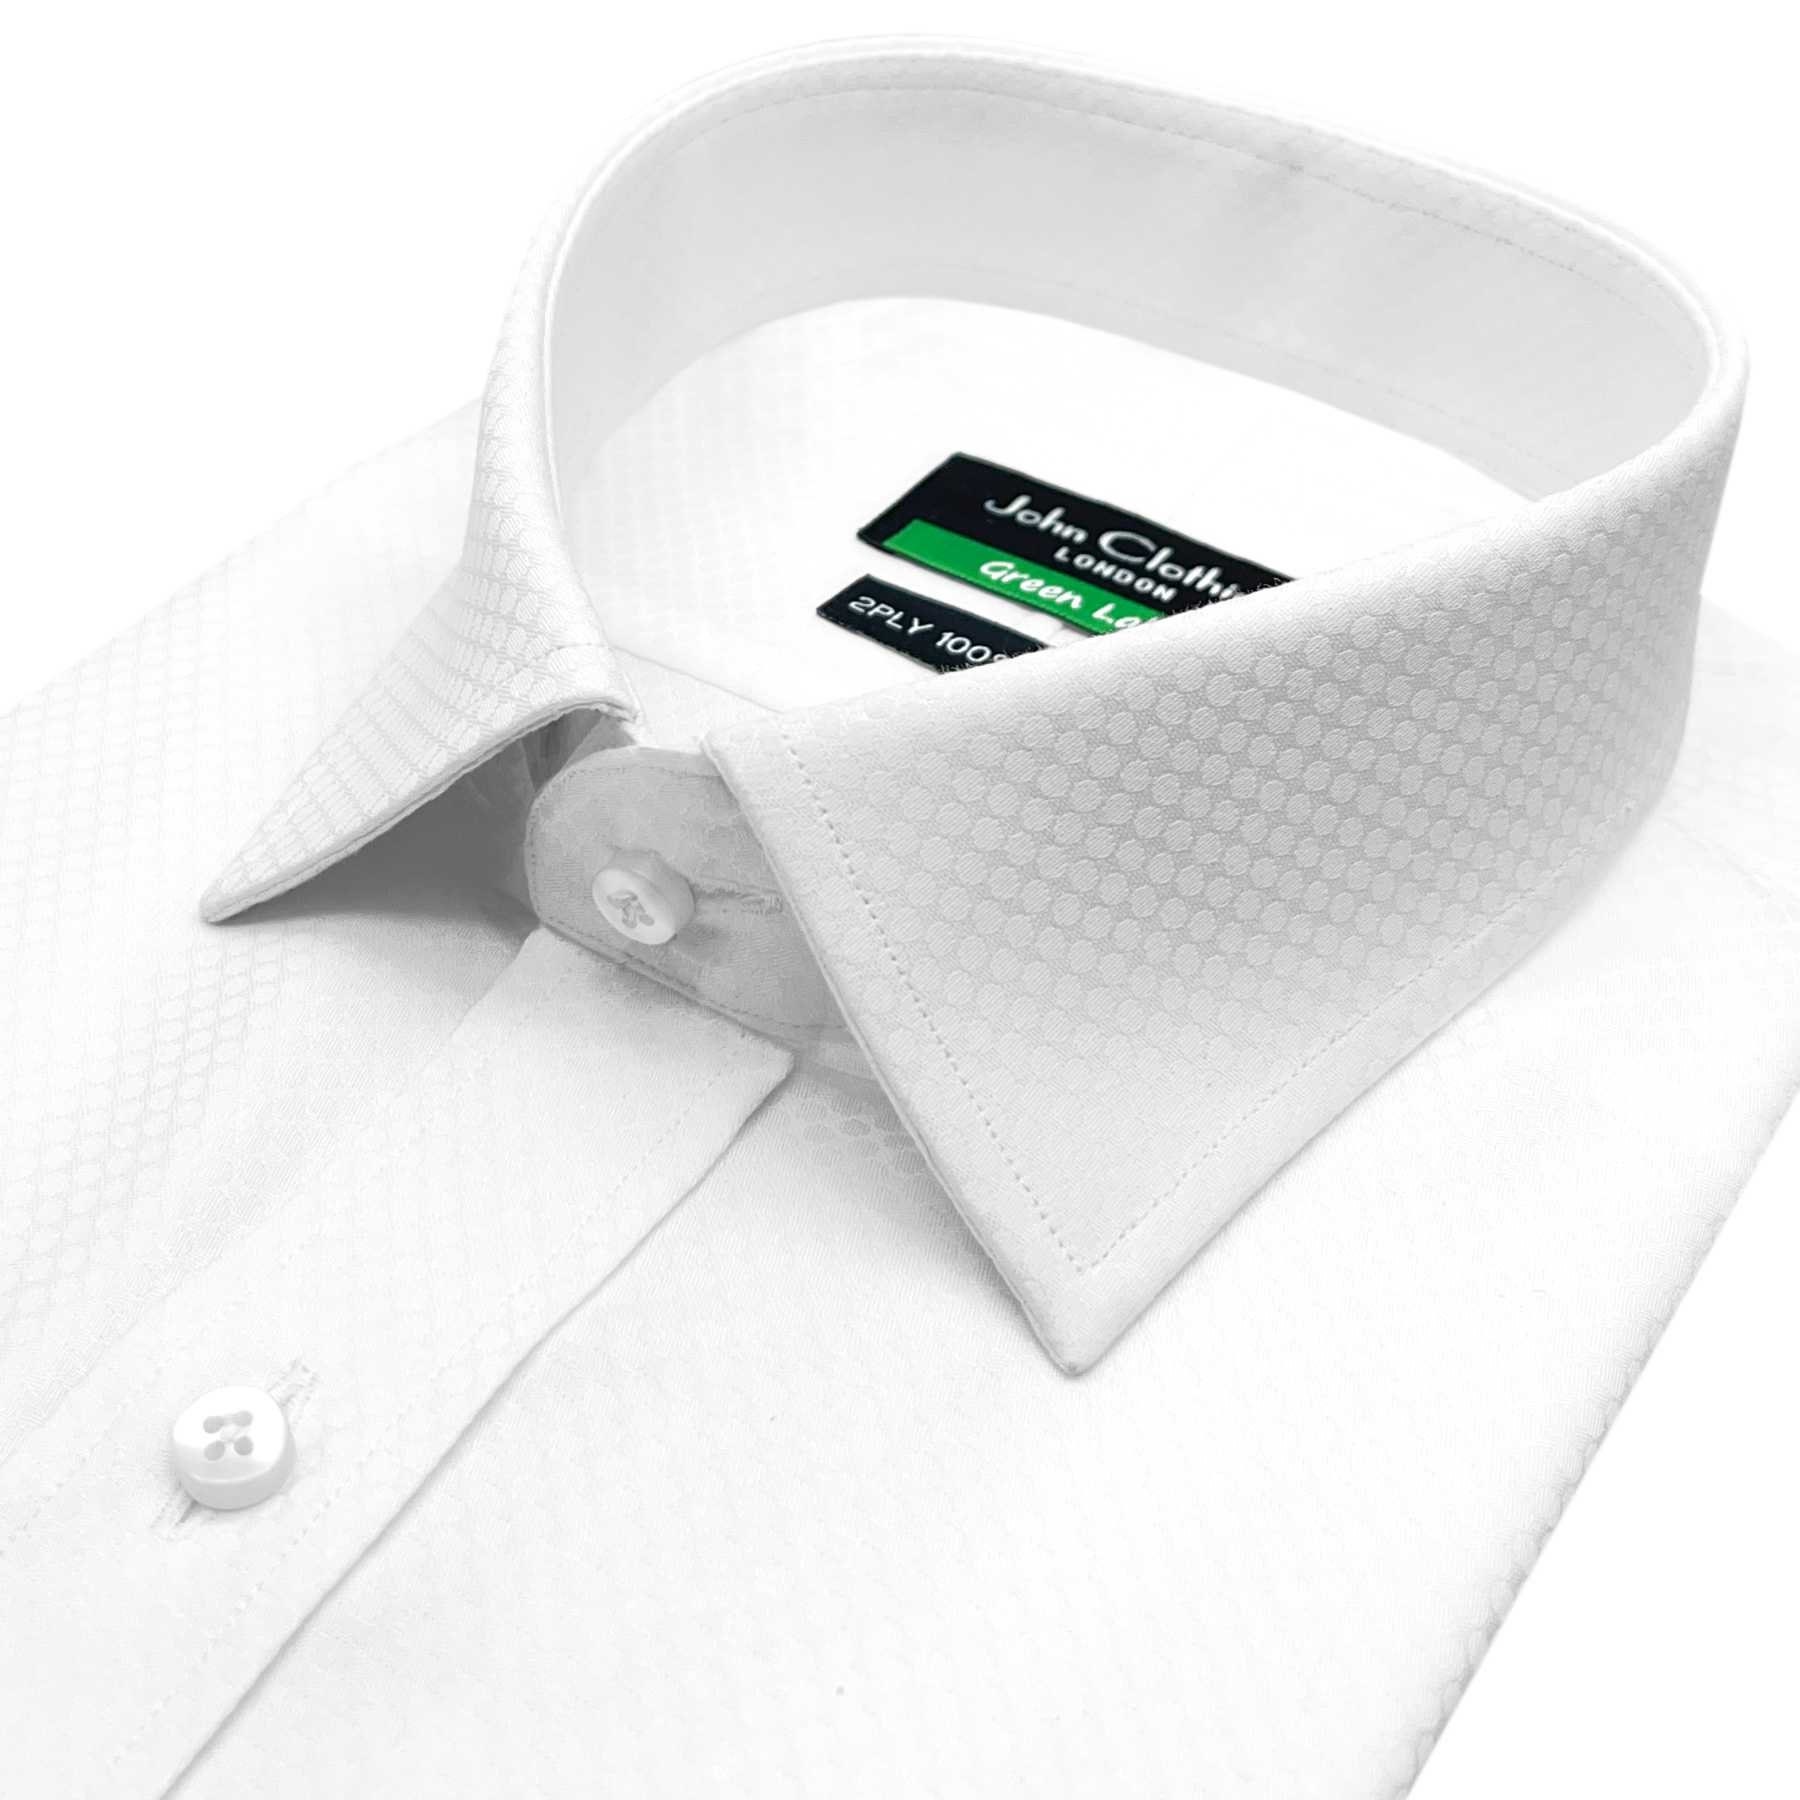 Buy White Dress Shirt Online In India -  India